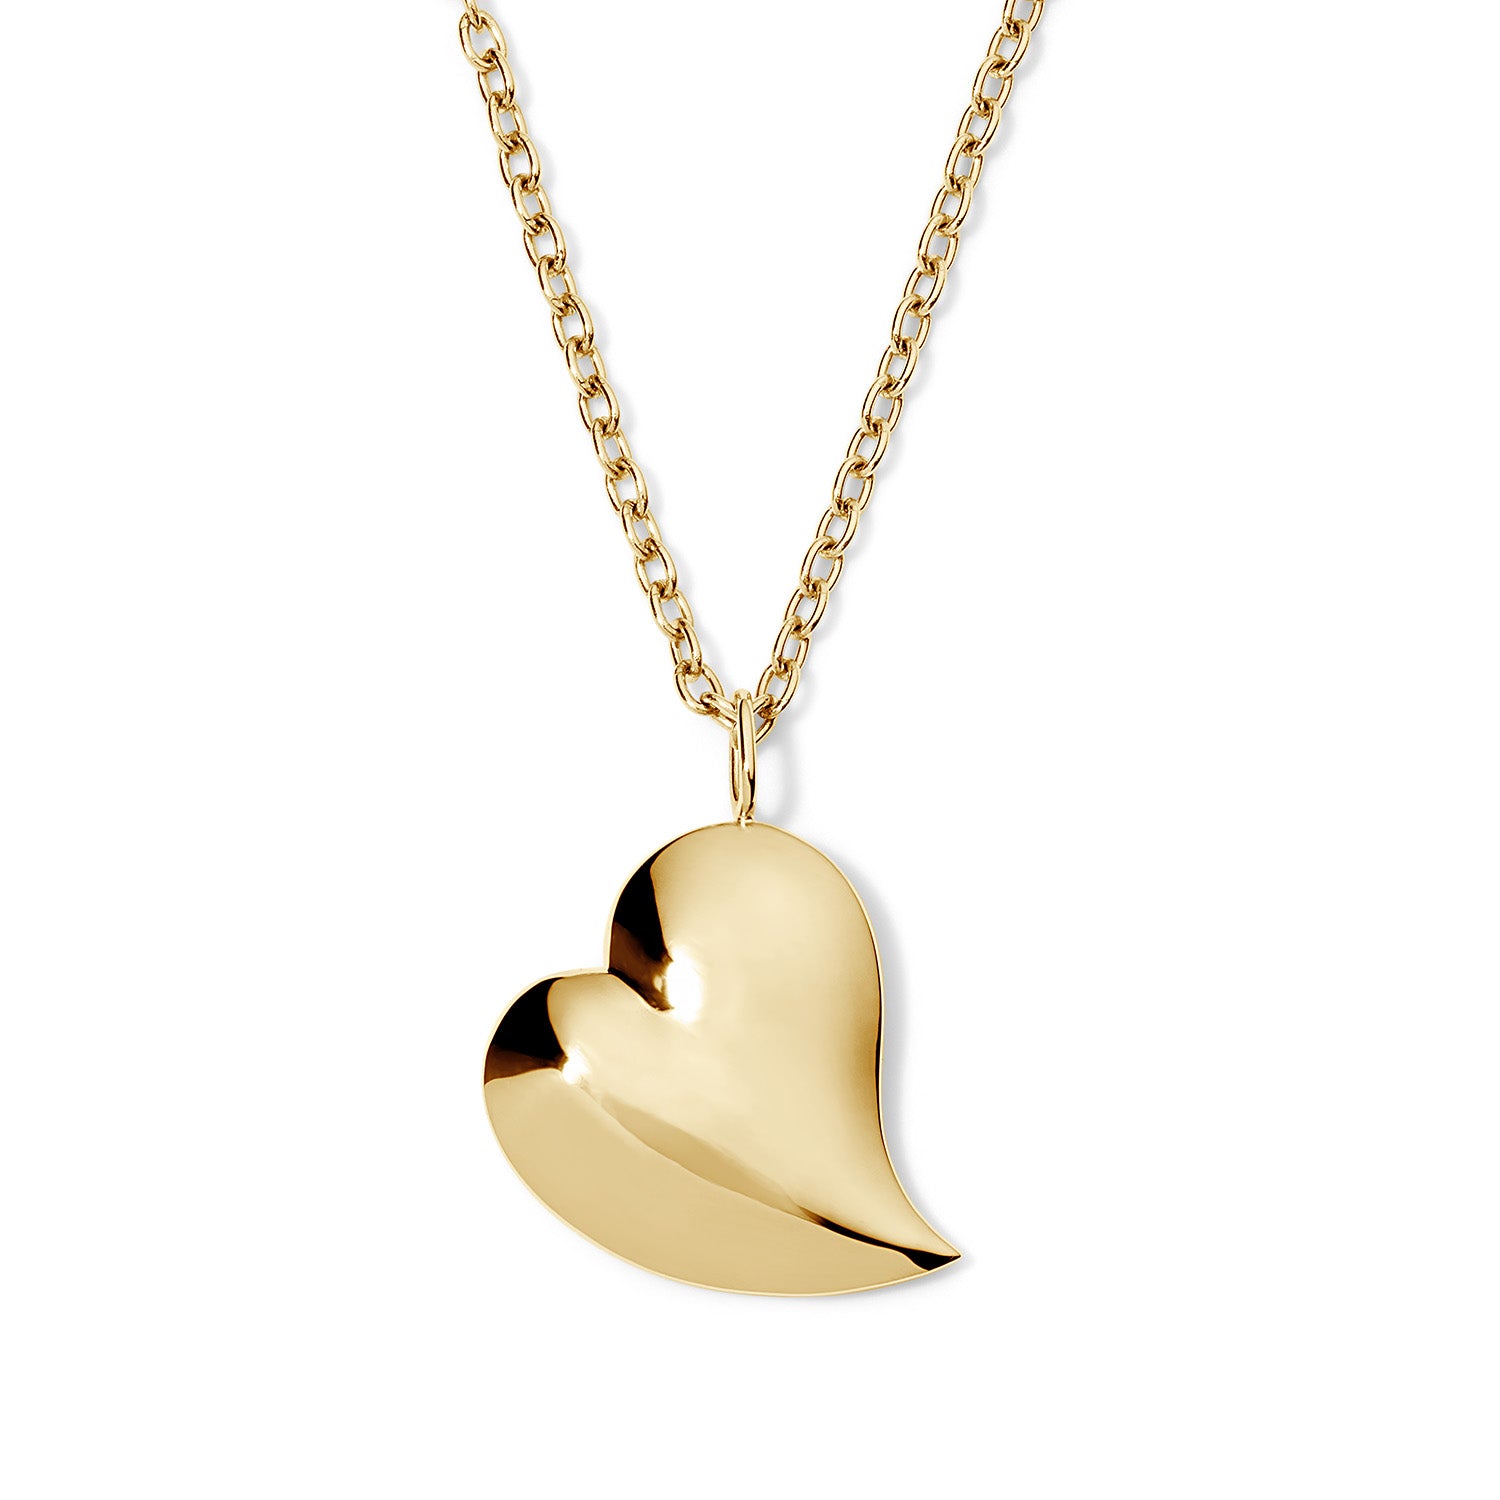 Heartfelt Gold Medium Puffy Heart with Cable Chain Necklace